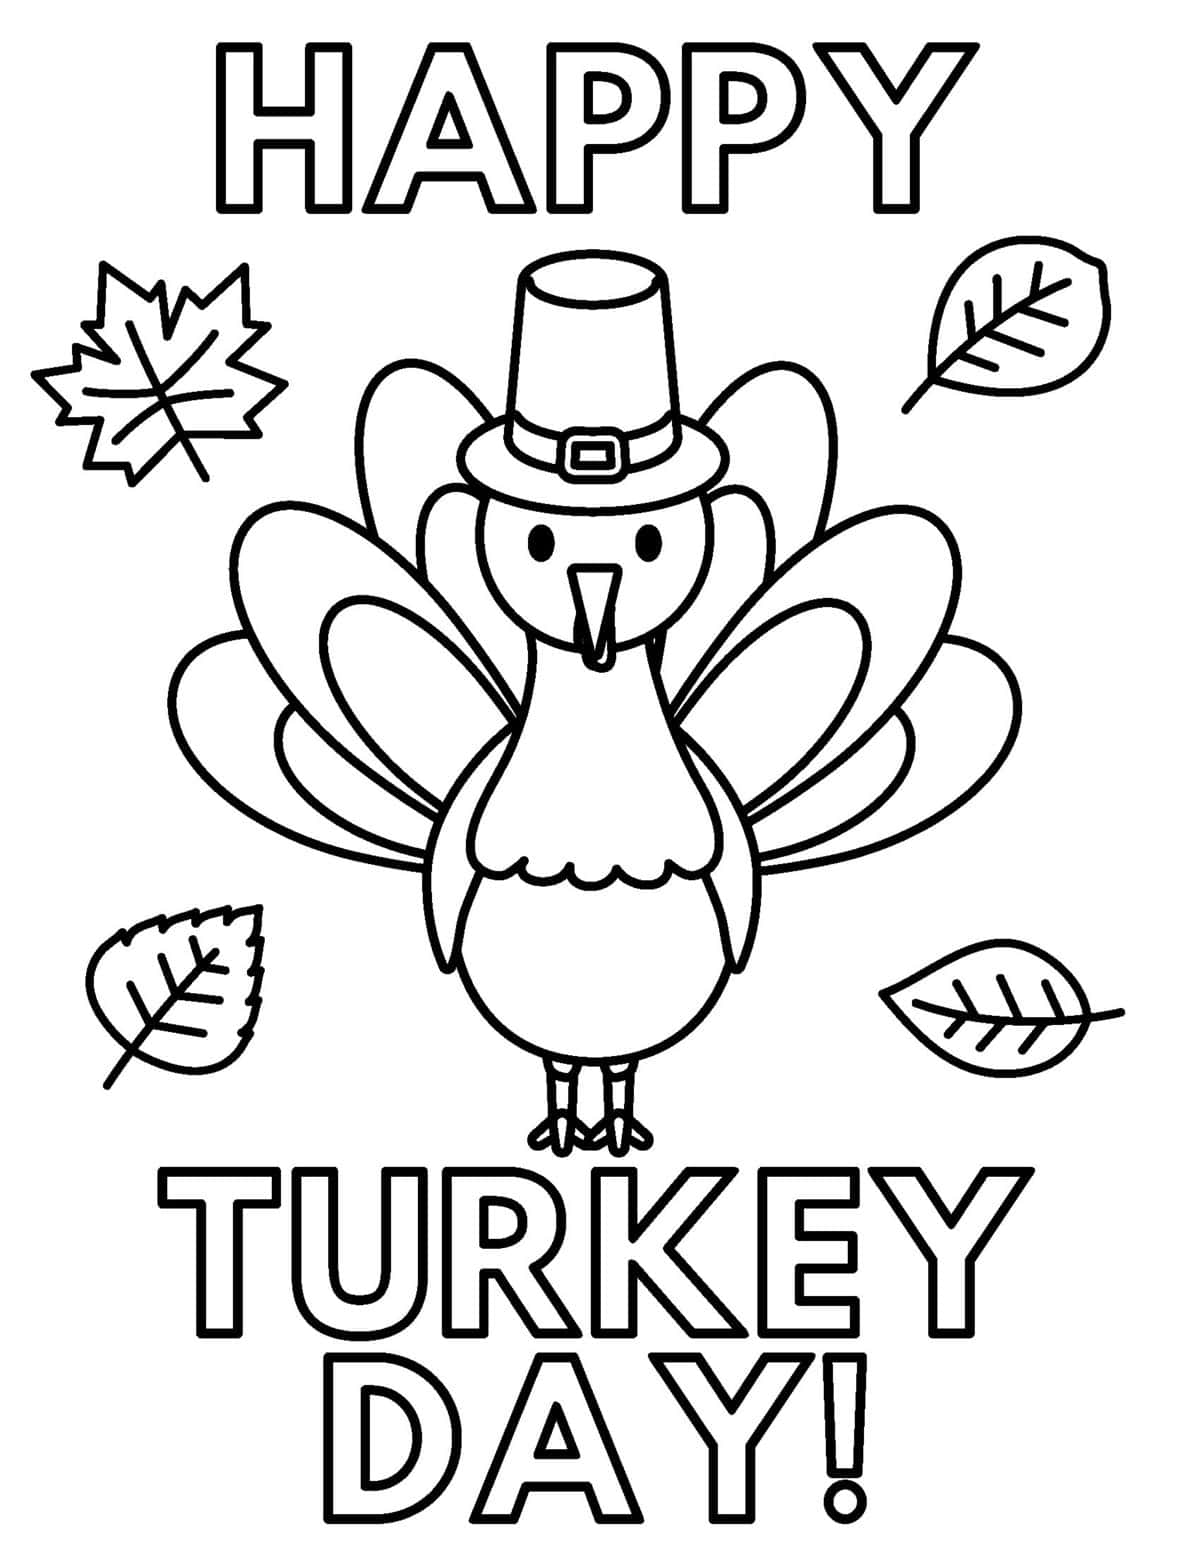 happy turkey day thanksgiving coloring page